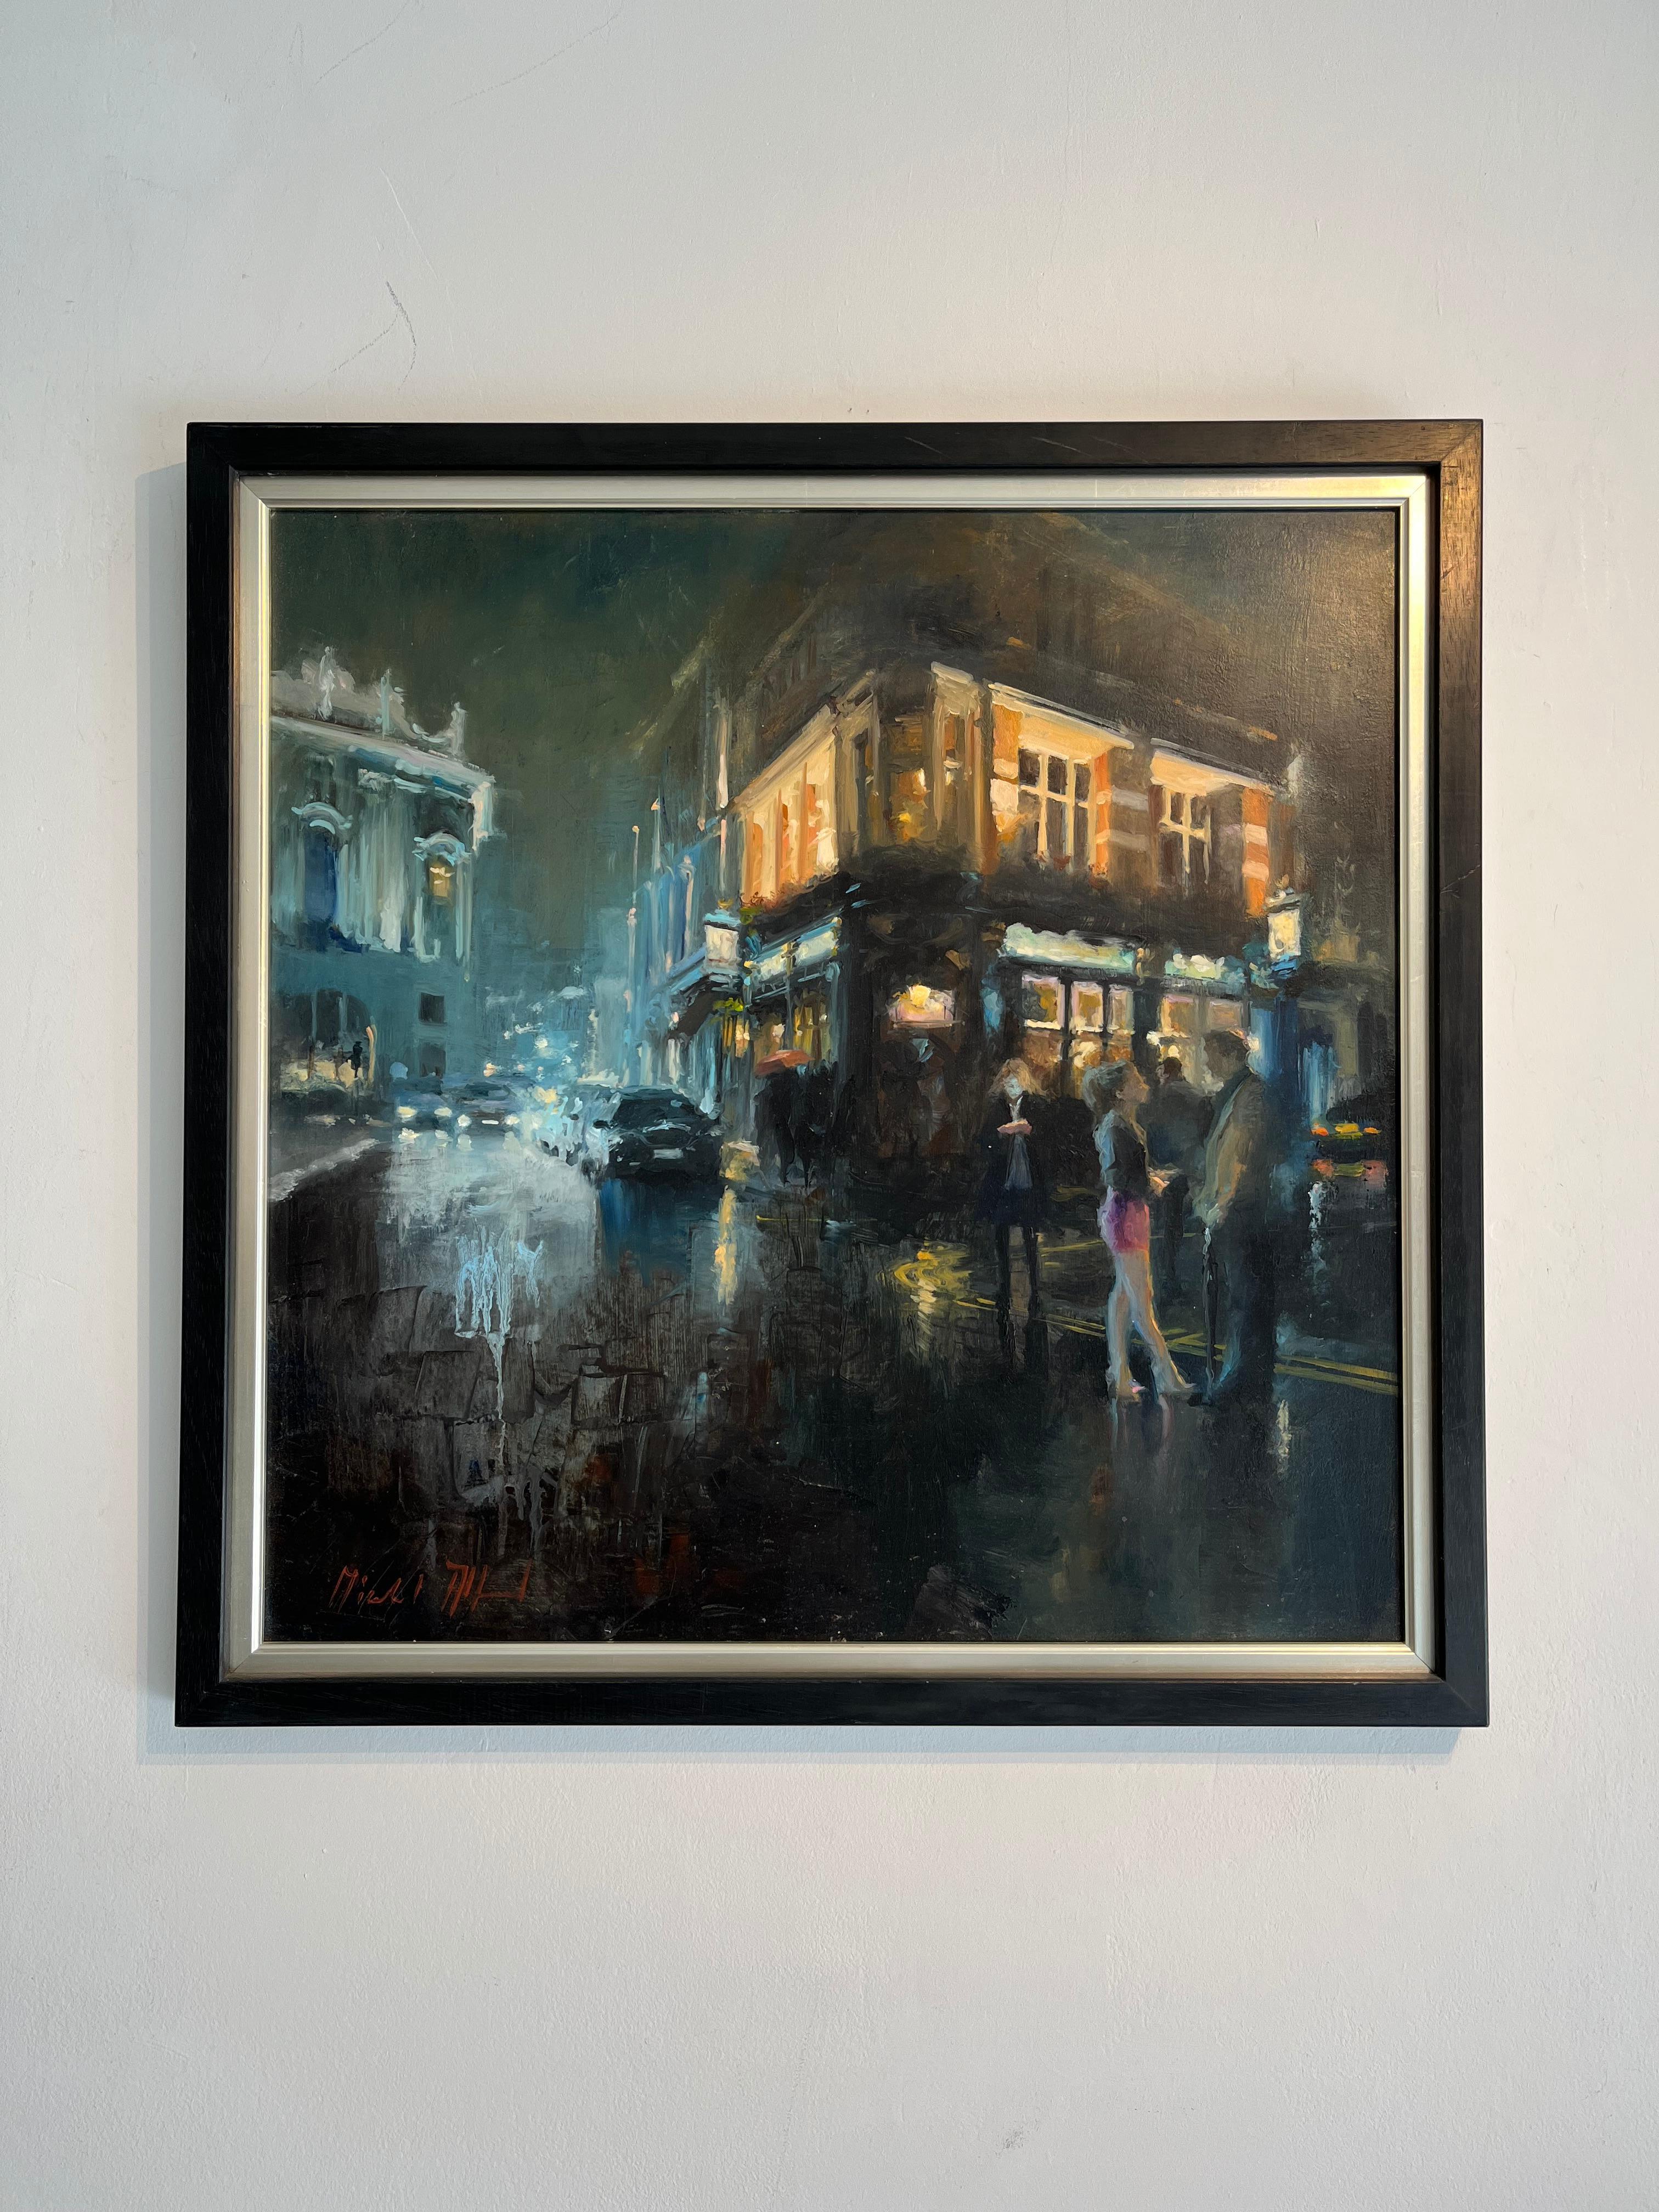 If on a Winters Night I-original impressionism London cityscape oil painting-Art - Painting by Michael Alford